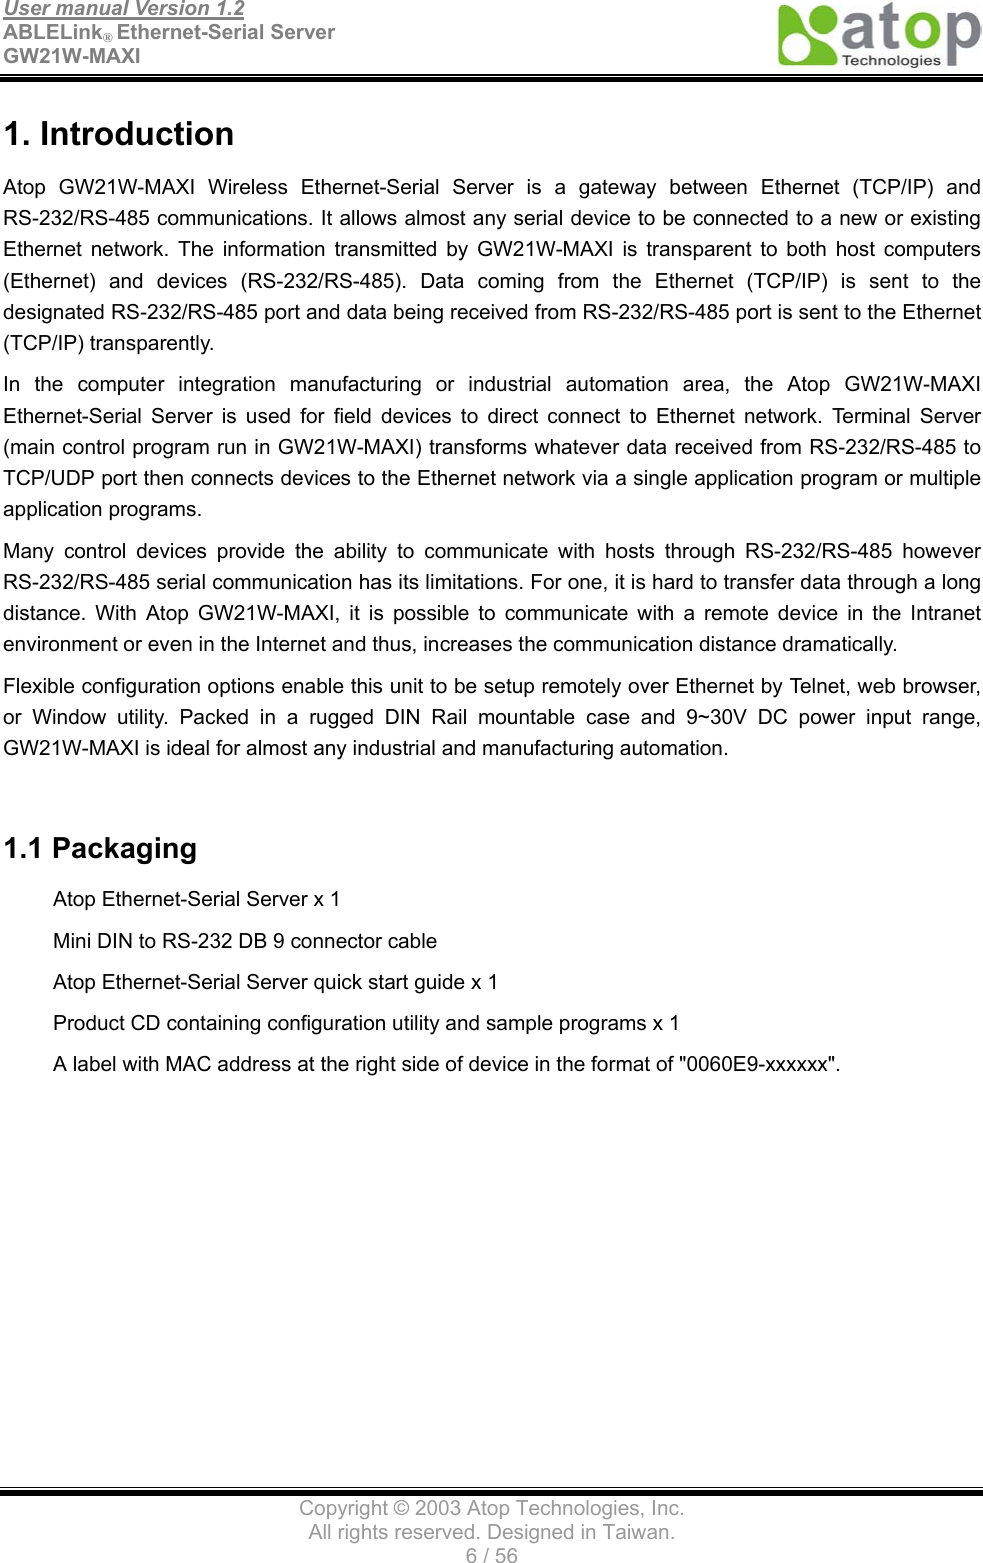 User manual Version 1.2 ABLELink® Ethernet-Serial Server   GW21W-MAXI                                      Copyright © 2003 Atop Technologies, Inc. All rights reserved. Designed in Taiwan. 6 / 56   1. Introduction Atop GW21W-MAXI Wireless Ethernet-Serial Server is a gateway between Ethernet (TCP/IP) and RS-232/RS-485 communications. It allows almost any serial device to be connected to a new or existing Ethernet network. The information transmitted by GW21W-MAXI is transparent to both host computers (Ethernet) and devices (RS-232/RS-485). Data coming from the Ethernet (TCP/IP) is sent to the designated RS-232/RS-485 port and data being received from RS-232/RS-485 port is sent to the Ethernet (TCP/IP) transparently. In the computer integration manufacturing or industrial automation area, the Atop GW21W-MAXI Ethernet-Serial Server is used for field devices to direct connect to Ethernet network. Terminal Server (main control program run in GW21W-MAXI) transforms whatever data received from RS-232/RS-485 to TCP/UDP port then connects devices to the Ethernet network via a single application program or multiple application programs.   Many control devices provide the ability to communicate with hosts through RS-232/RS-485 however RS-232/RS-485 serial communication has its limitations. For one, it is hard to transfer data through a long distance. With Atop GW21W-MAXI, it is possible to communicate with a remote device in the Intranet environment or even in the Internet and thus, increases the communication distance dramatically. Flexible configuration options enable this unit to be setup remotely over Ethernet by Telnet, web browser, or Window utility. Packed in a rugged DIN Rail mountable case and 9~30V DC power input range, GW21W-MAXI is ideal for almost any industrial and manufacturing automation.  1.1 Packaging Atop Ethernet-Serial Server x 1 Mini DIN to RS-232 DB 9 connector cable Atop Ethernet-Serial Server quick start guide x 1 Product CD containing configuration utility and sample programs x 1 A label with MAC address at the right side of device in the format of &quot;0060E9-xxxxxx&quot;.    